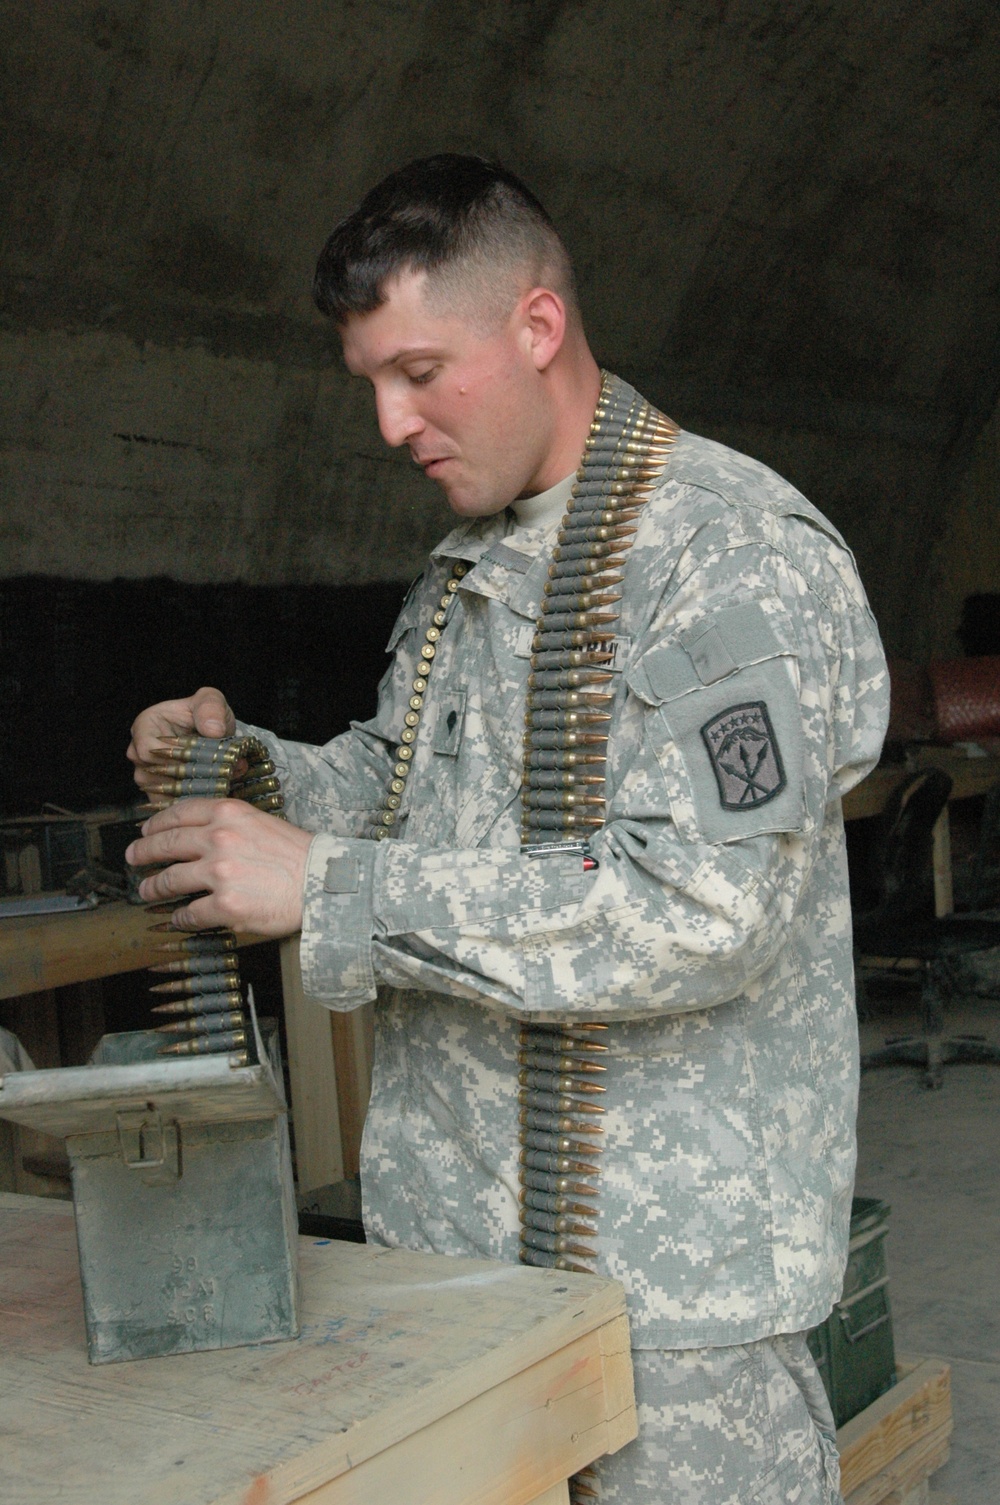 13th Sustainment Command (Expeditionary) ships bullets from Iraq to Afghanistan